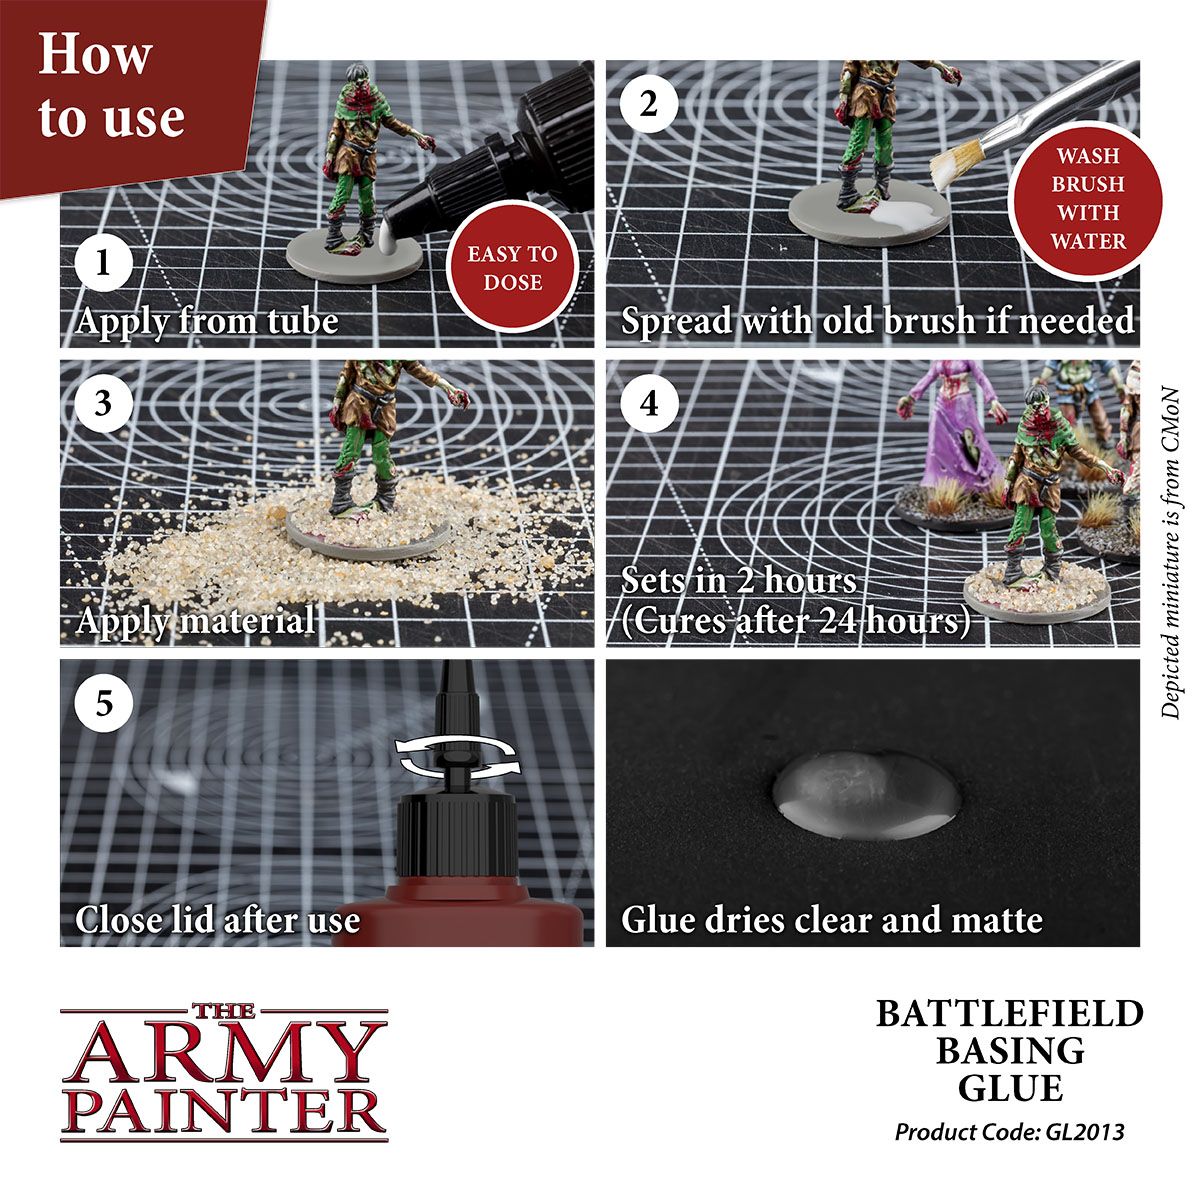 The Army Painter - Battlefield Basing Glue